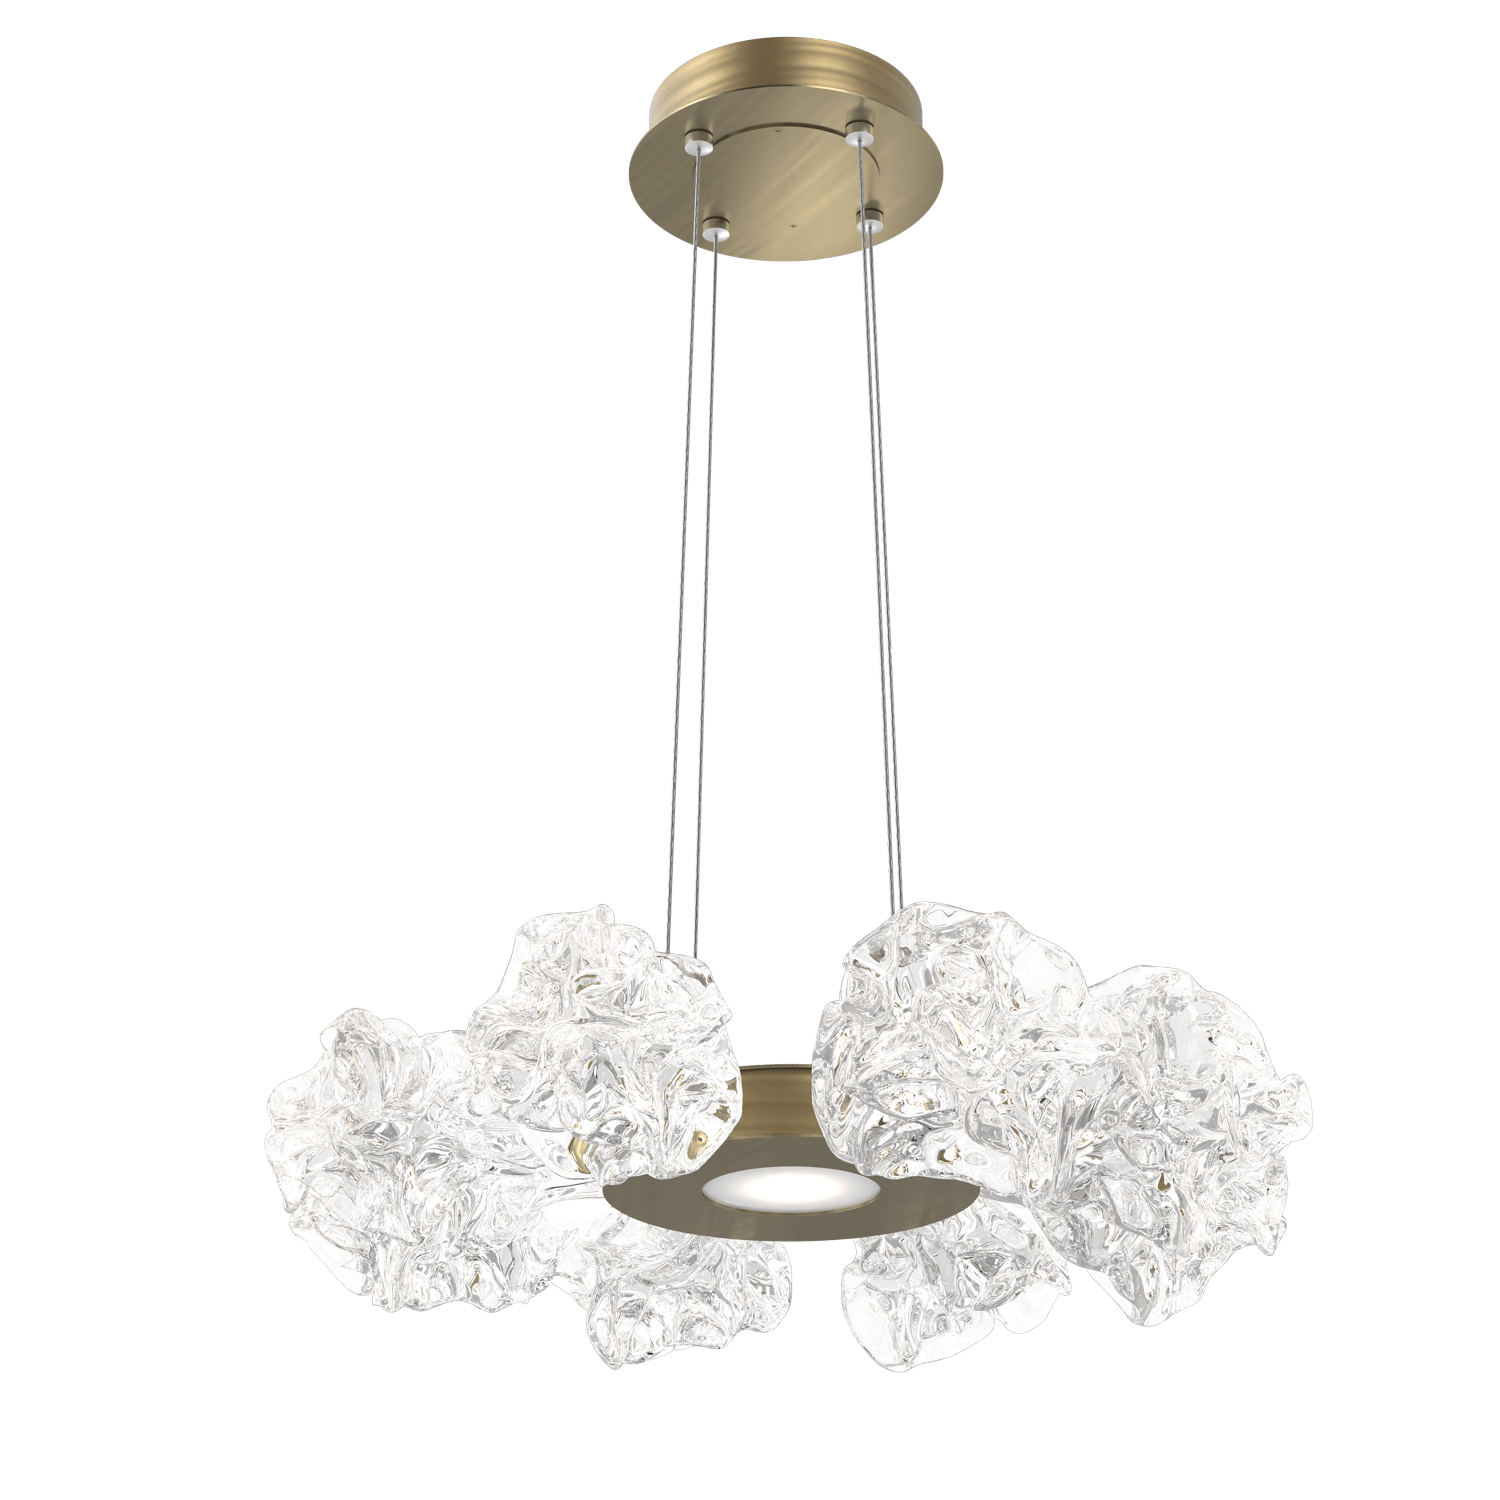 CHB0059-24-HB-Hammerton-Studio-Blossom-24-inch-radial-ring-chandelier-with-heritage-brass-finish-and-clear-handblown-crystal-glass-shades-and-LED-lamping